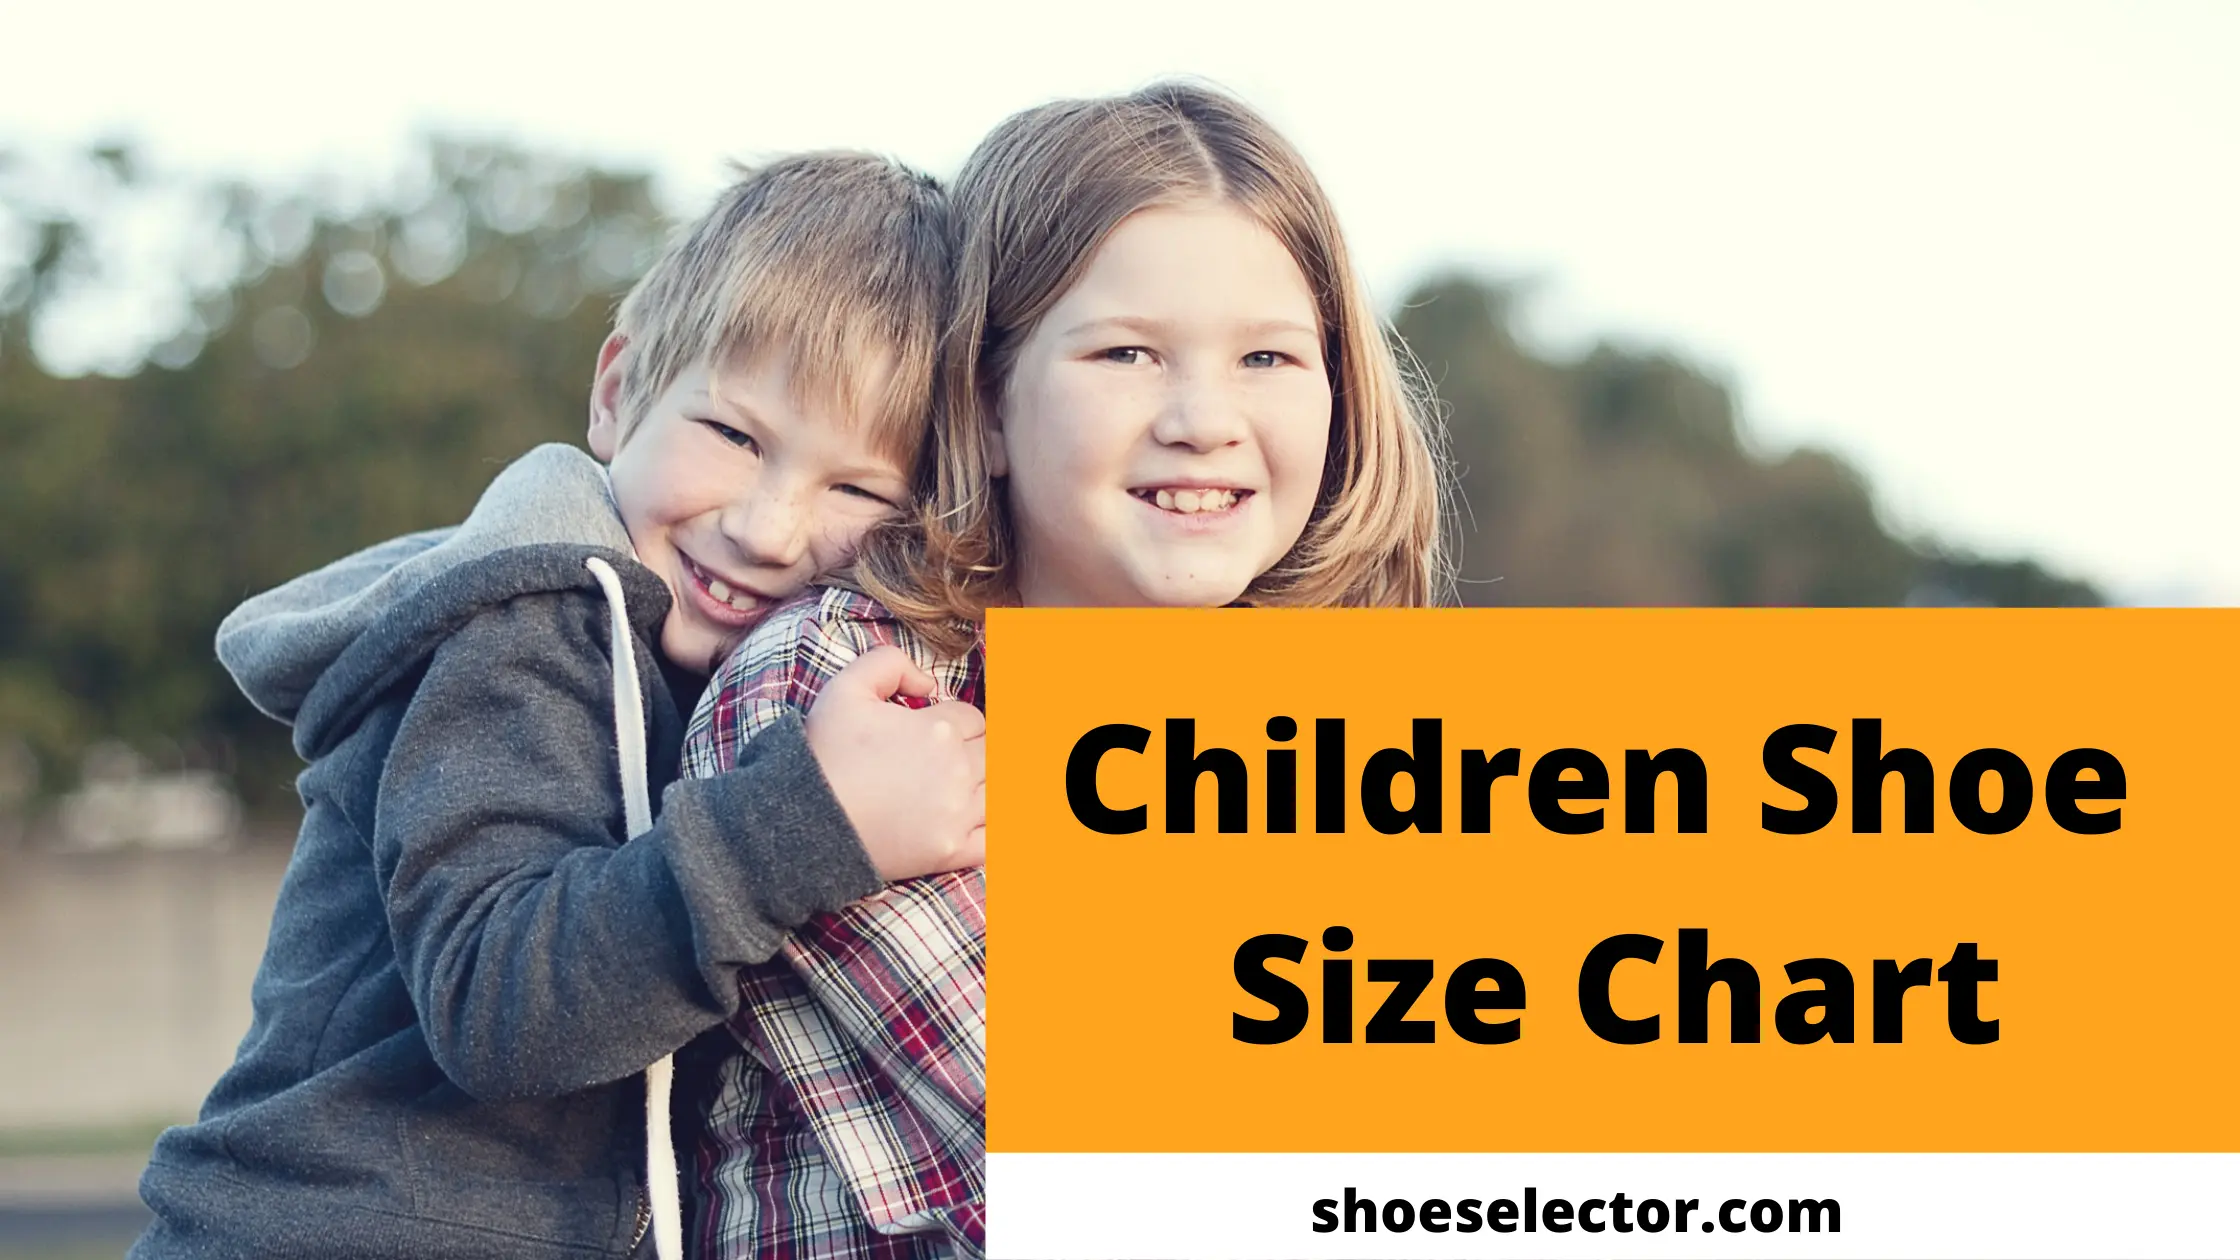 Children's Shoe Size Chart And Conversations